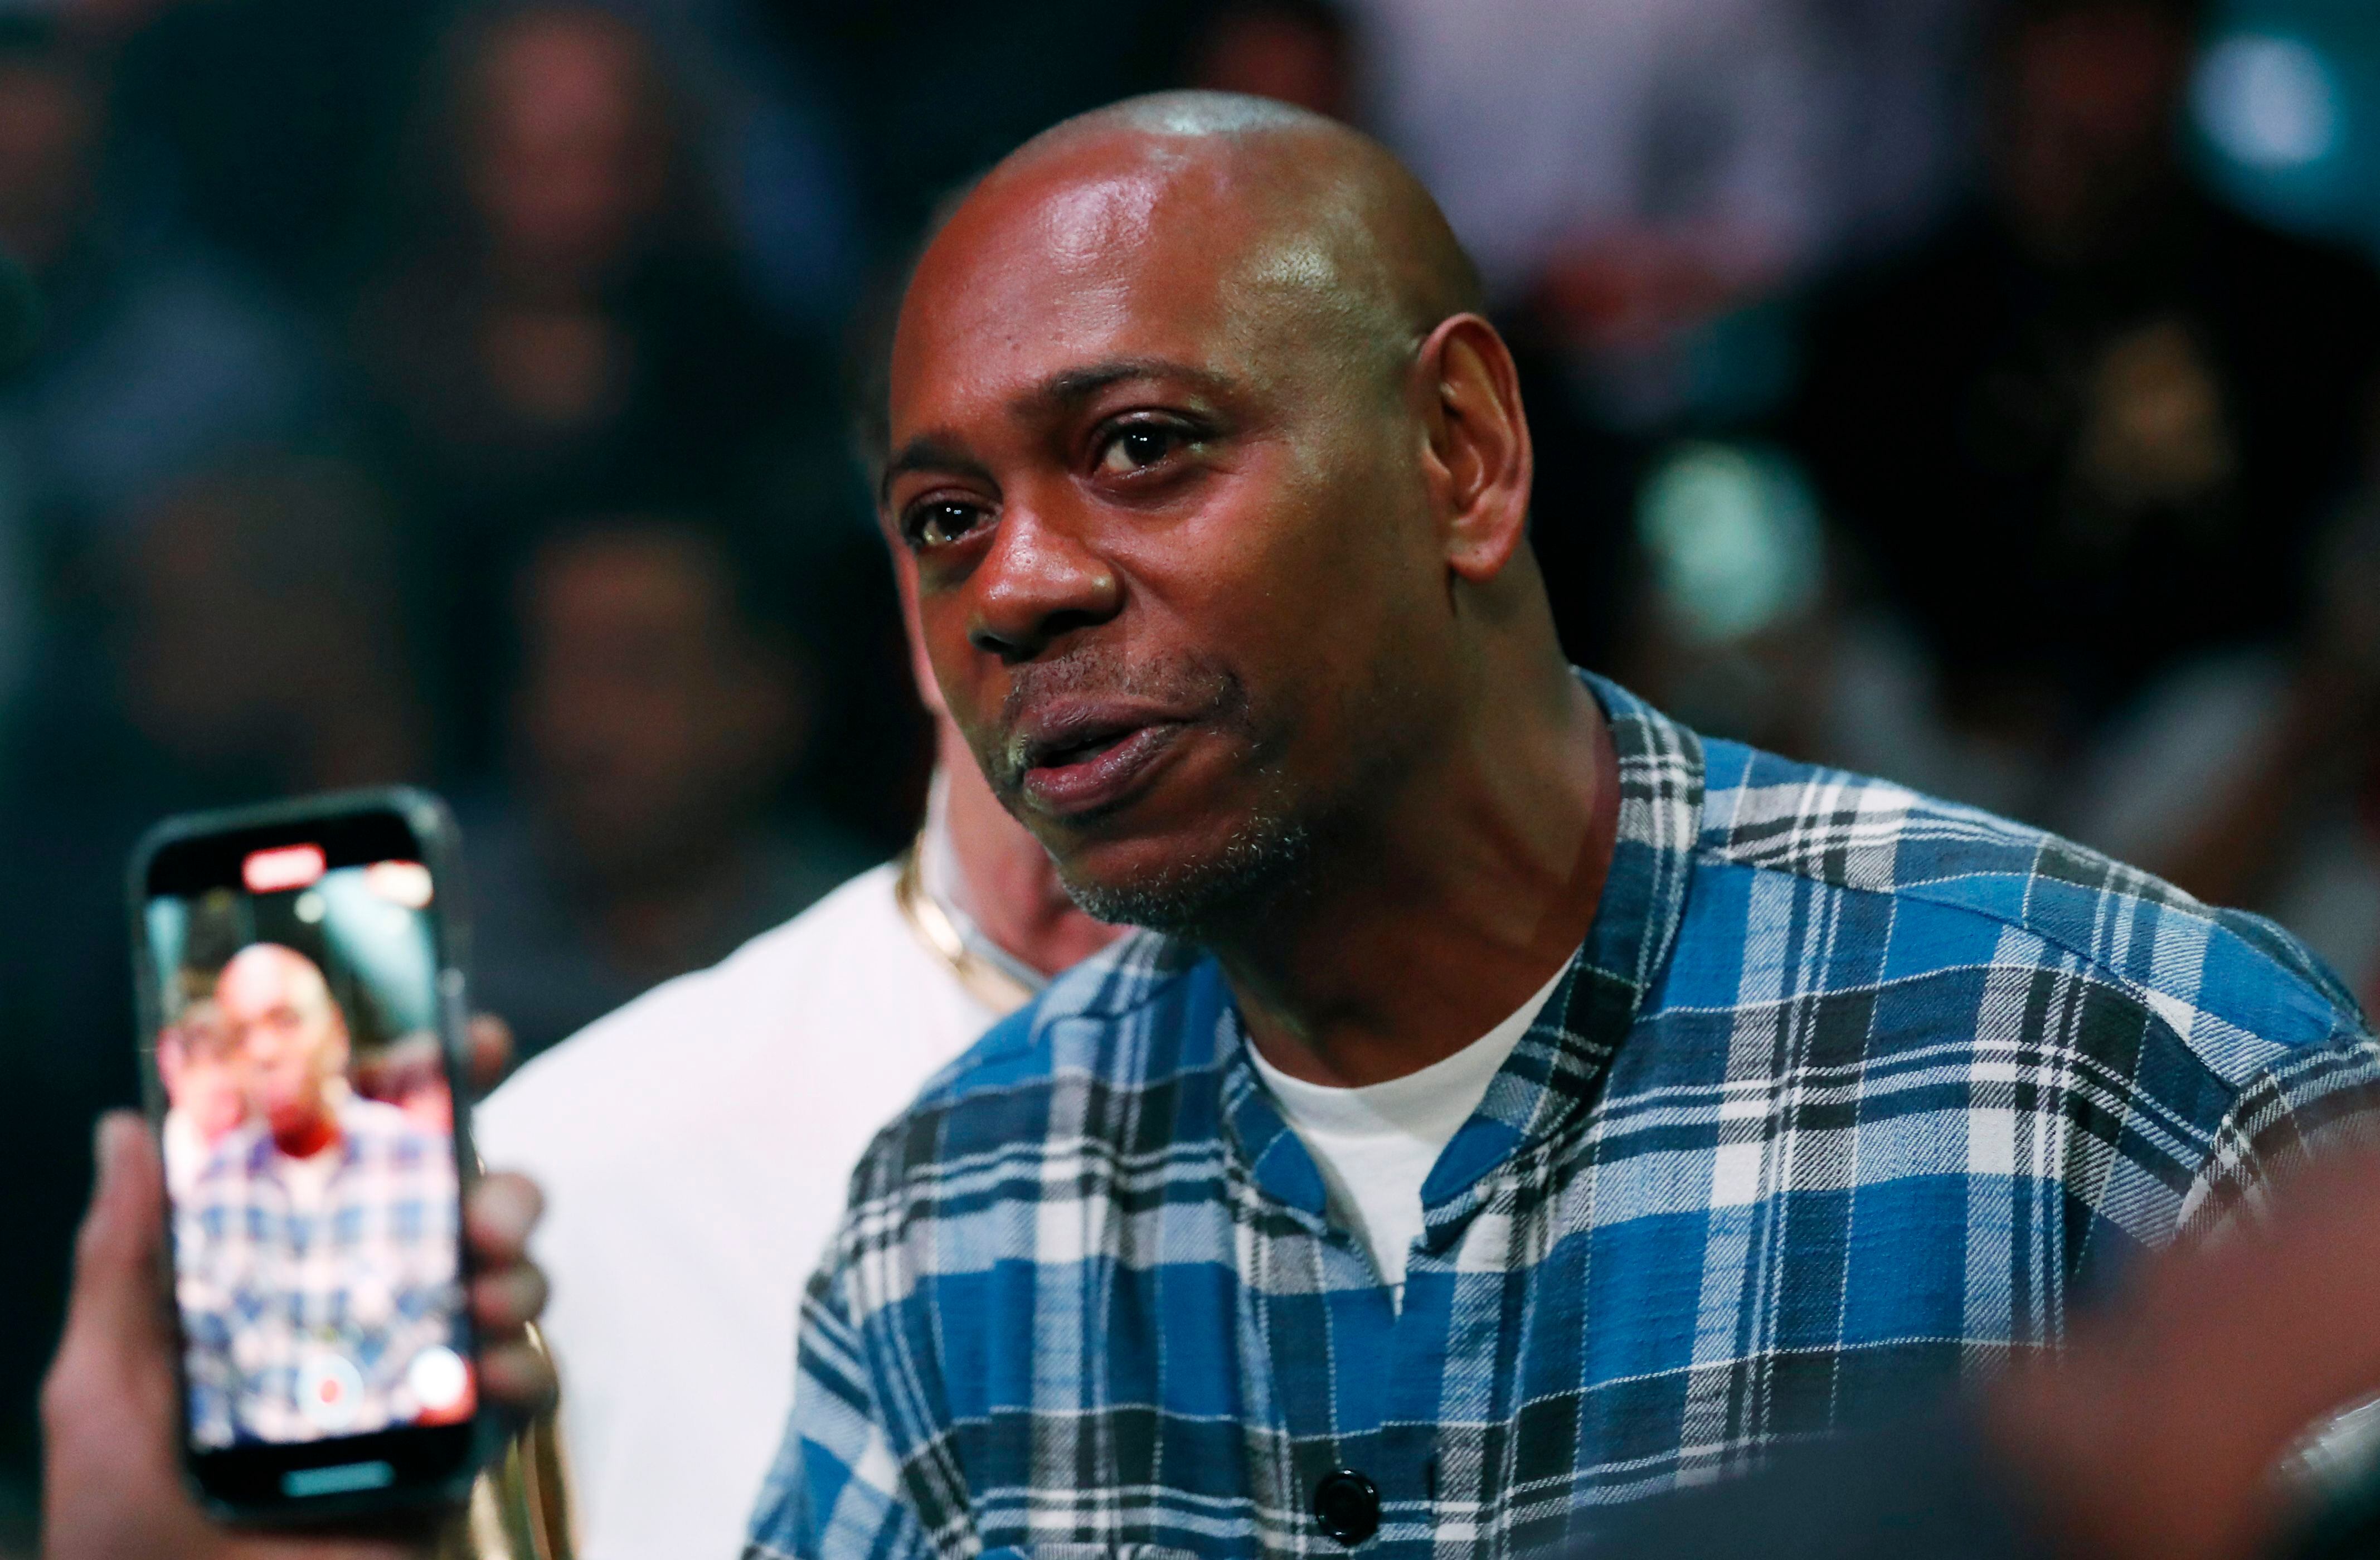 Comedian Dave Chappelle attacked on stage during performance